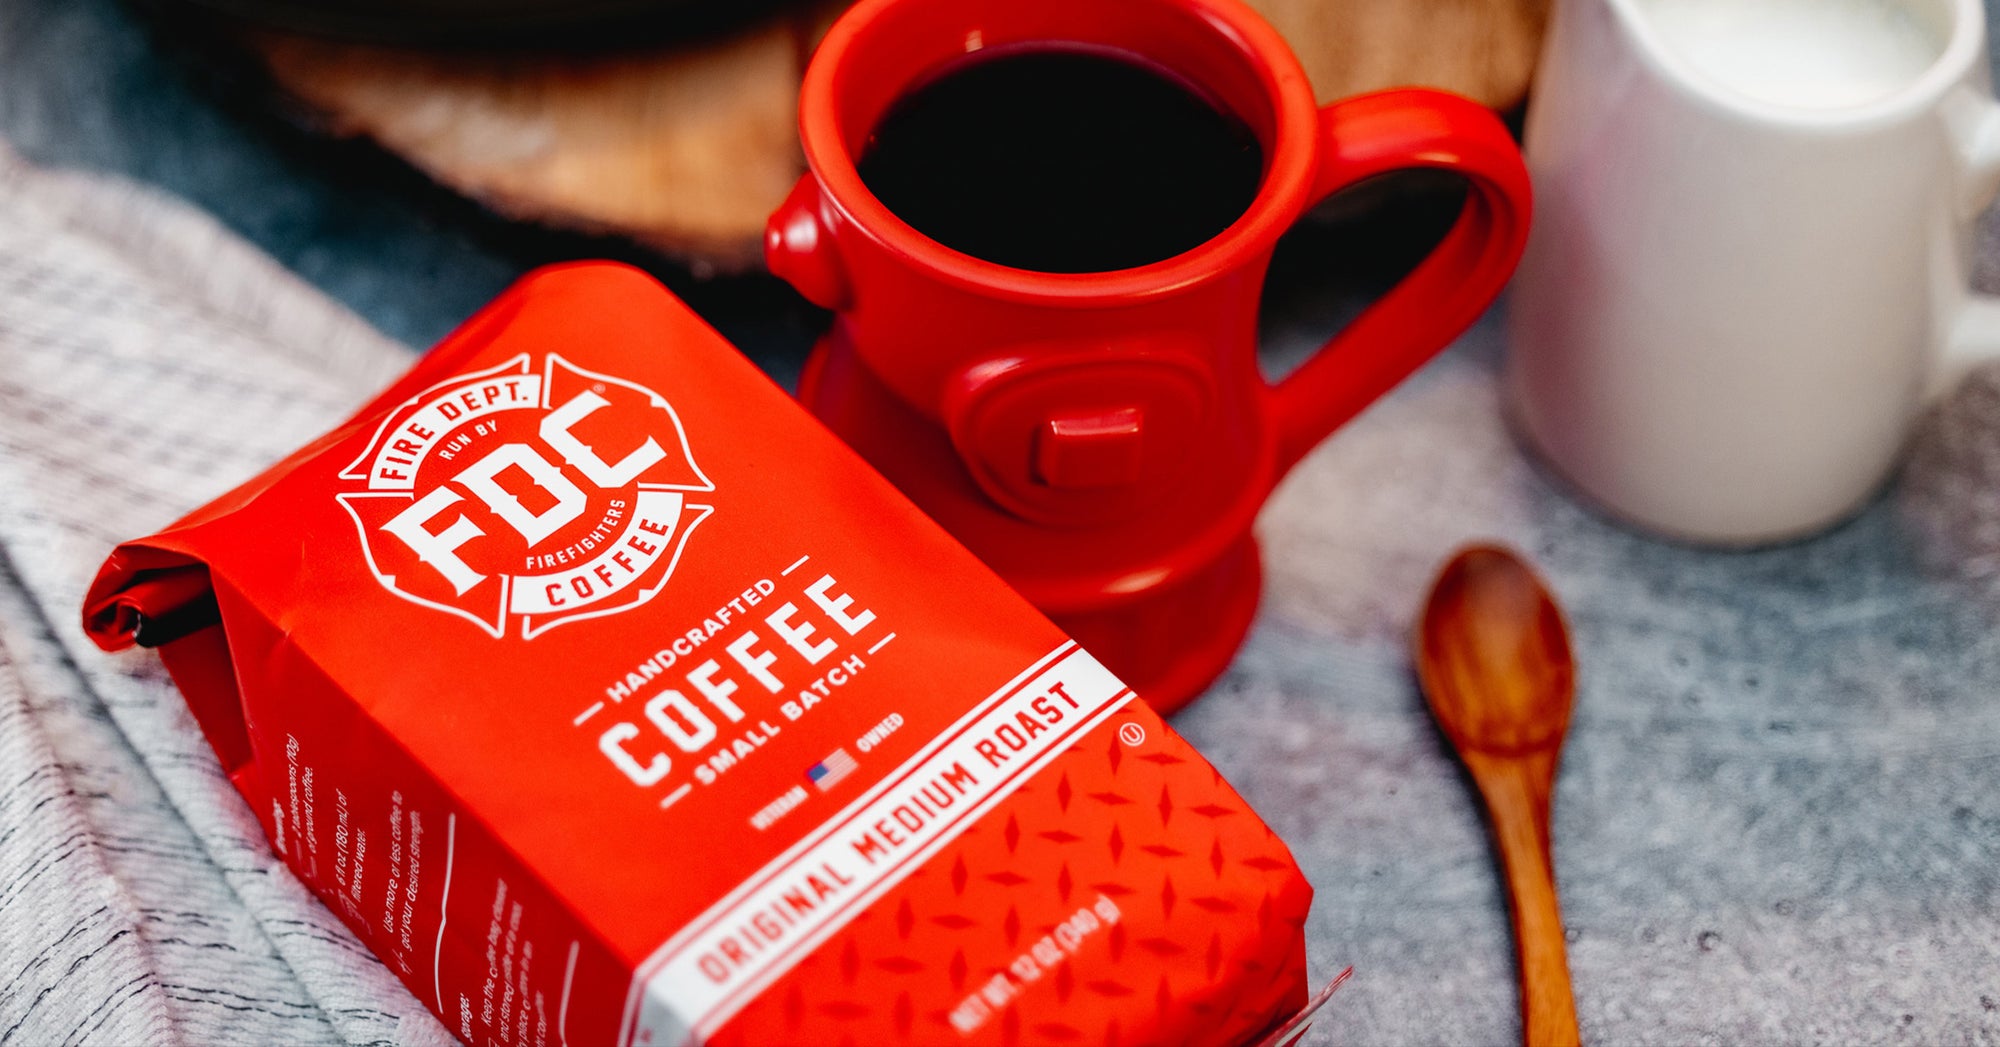 Red Fire Dept. Coffee bag and a red hydrant coffee mug